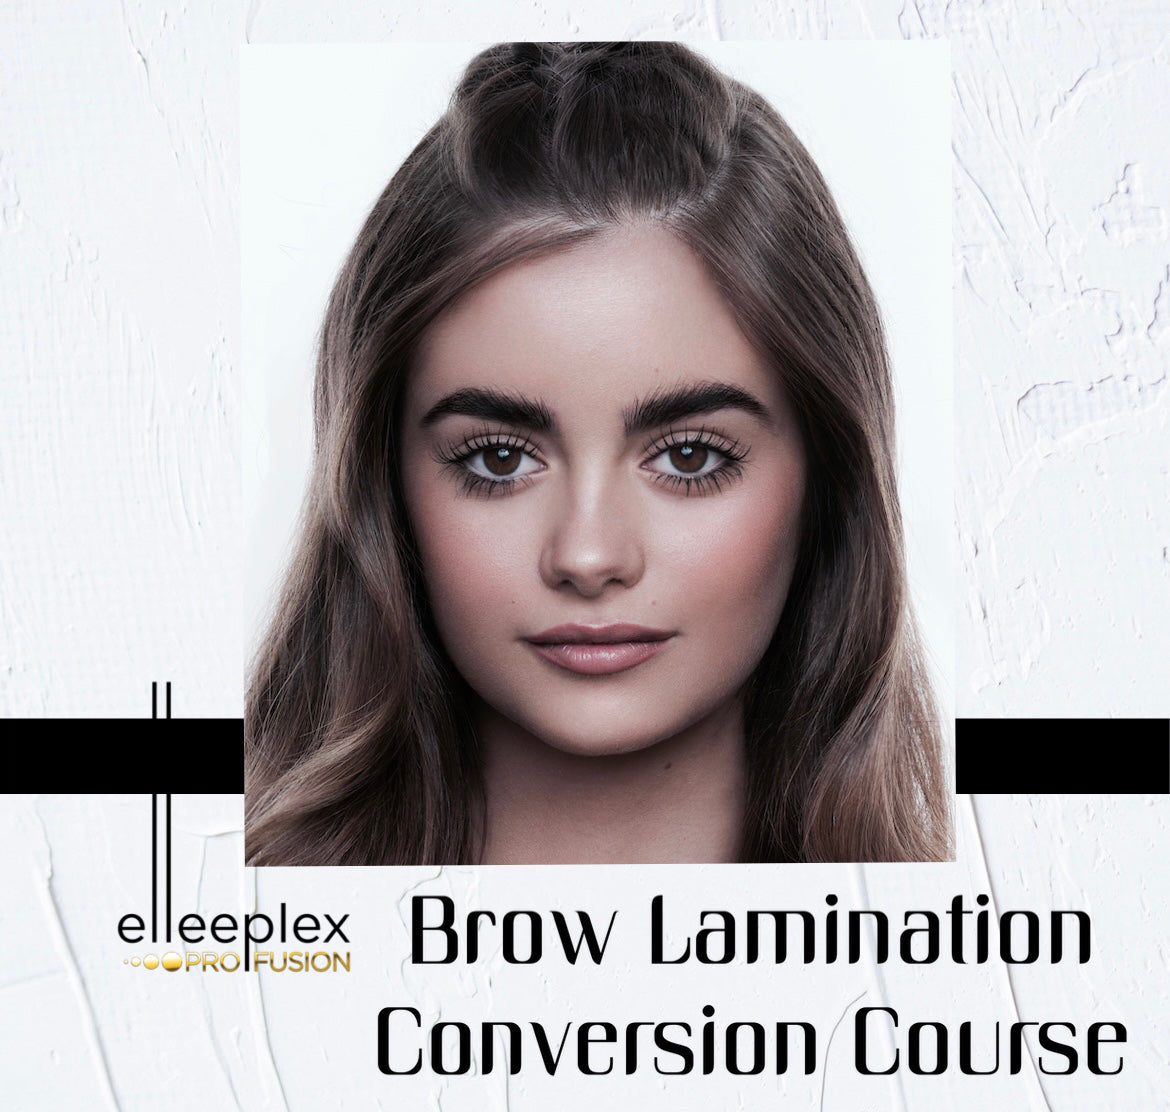 Elleeplex Profusion BROW Lamination Online Conversion Course - Panoply Beauty 